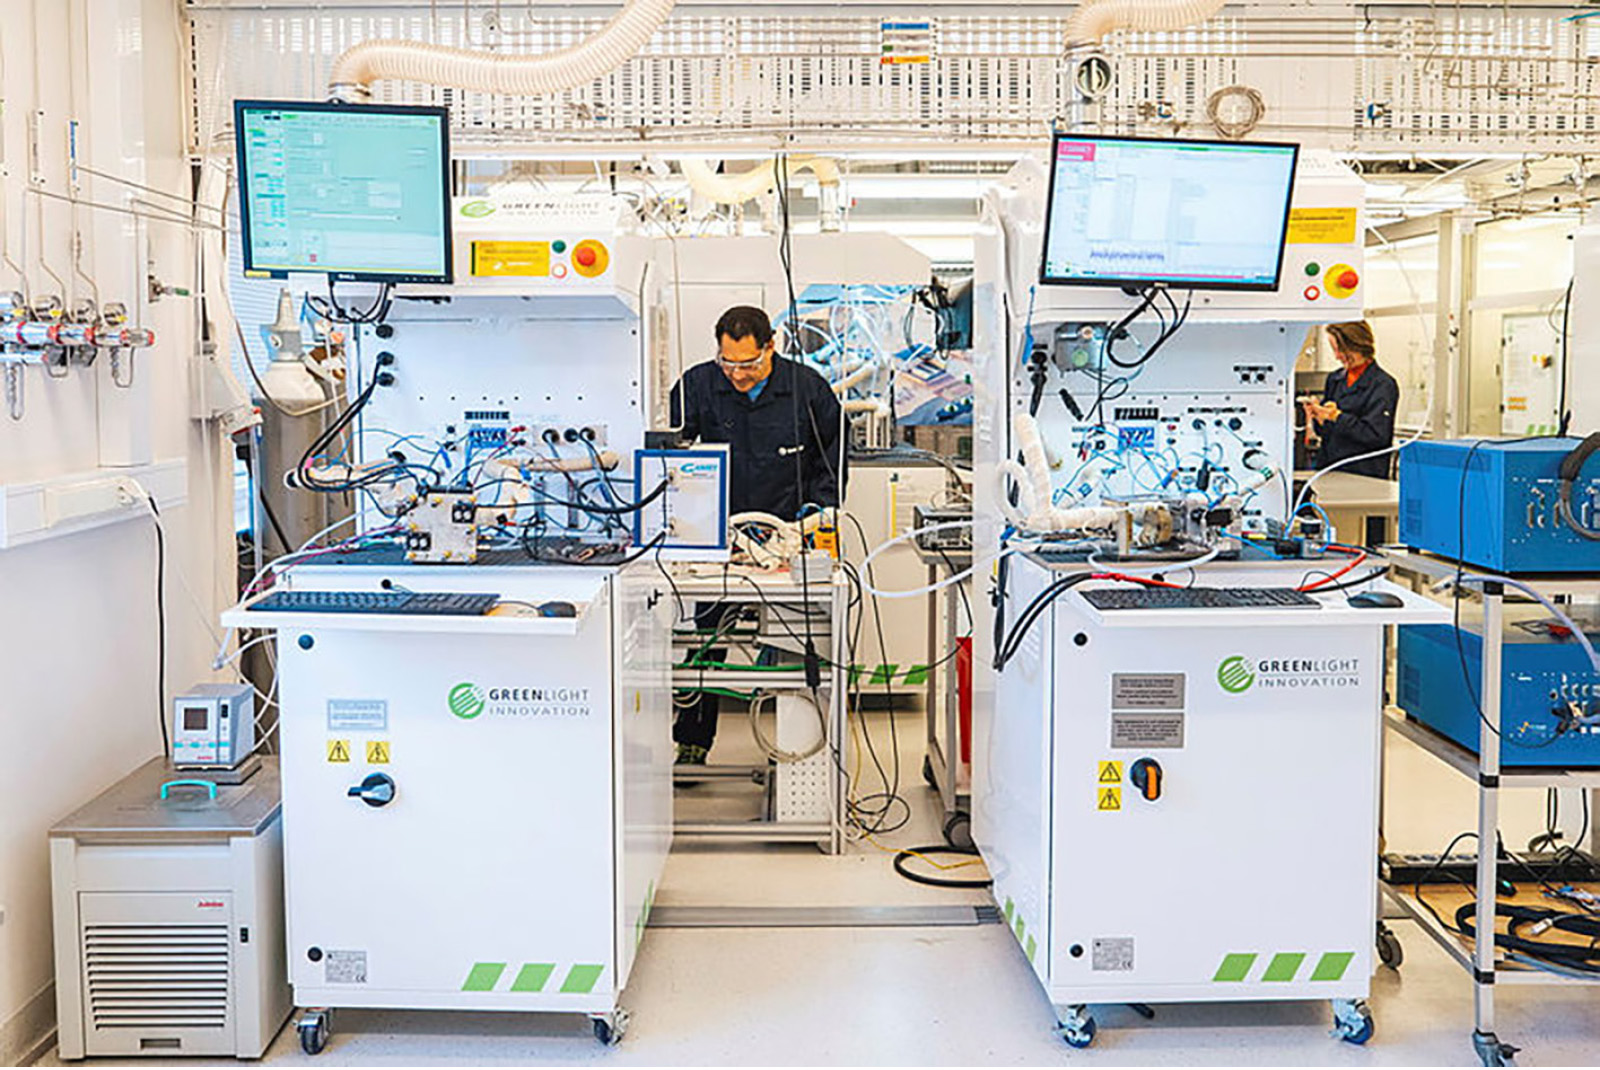 SINTEF is a leading R&D and innovation actor in Europe within hydrogen technologies, with more than 30 years' experience and significant activities.